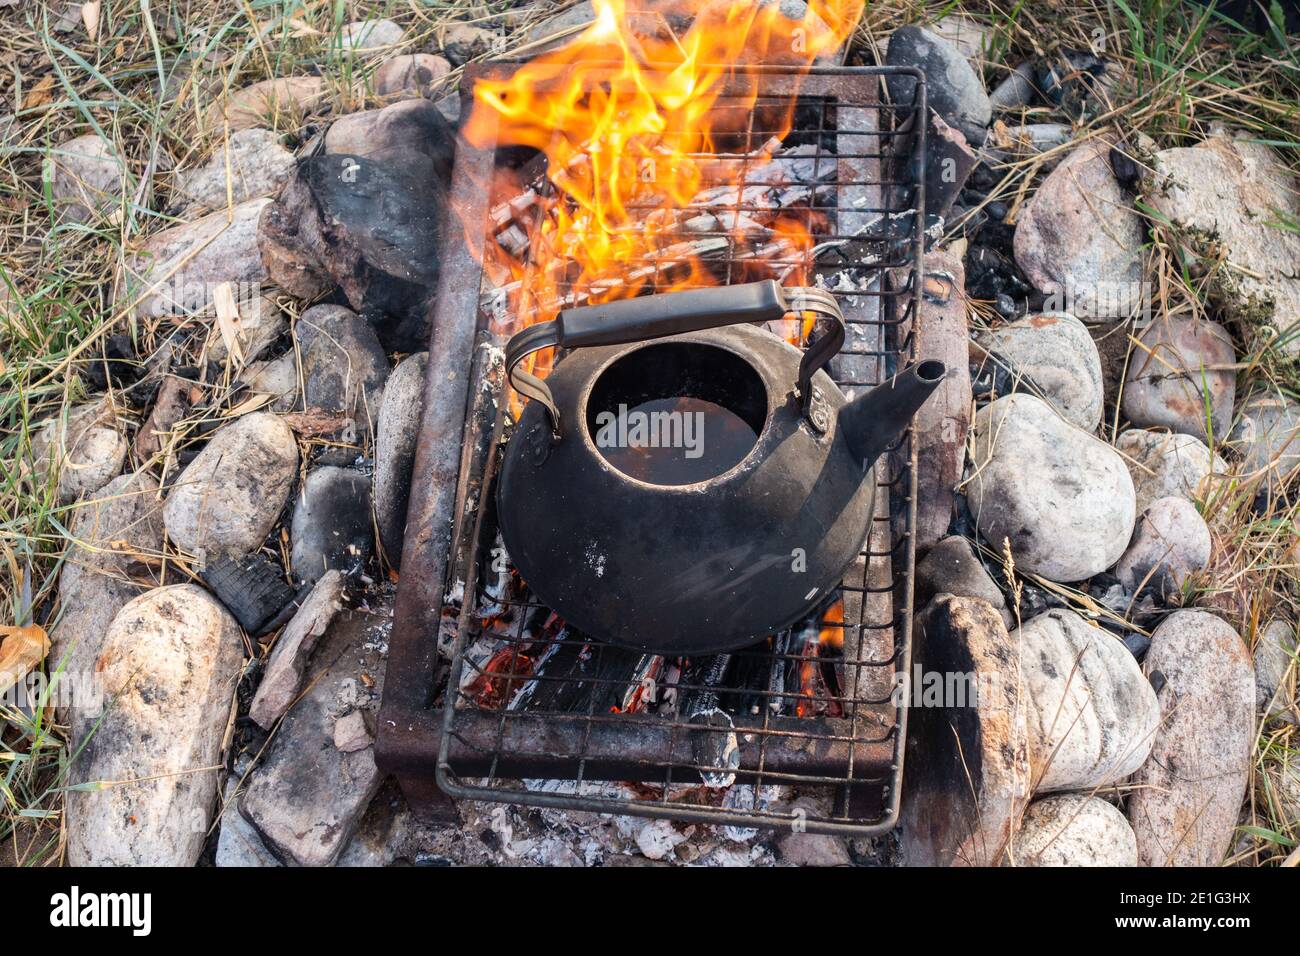 https://c8.alamy.com/comp/2E1G3HX/a-kettle-with-hot-water-over-the-fire-antique-teapot-on-stones-on-grate-over-the-fire-for-making-tea-or-coffee-outdoorsa-special-hearth-for-outdoor-2E1G3HX.jpg